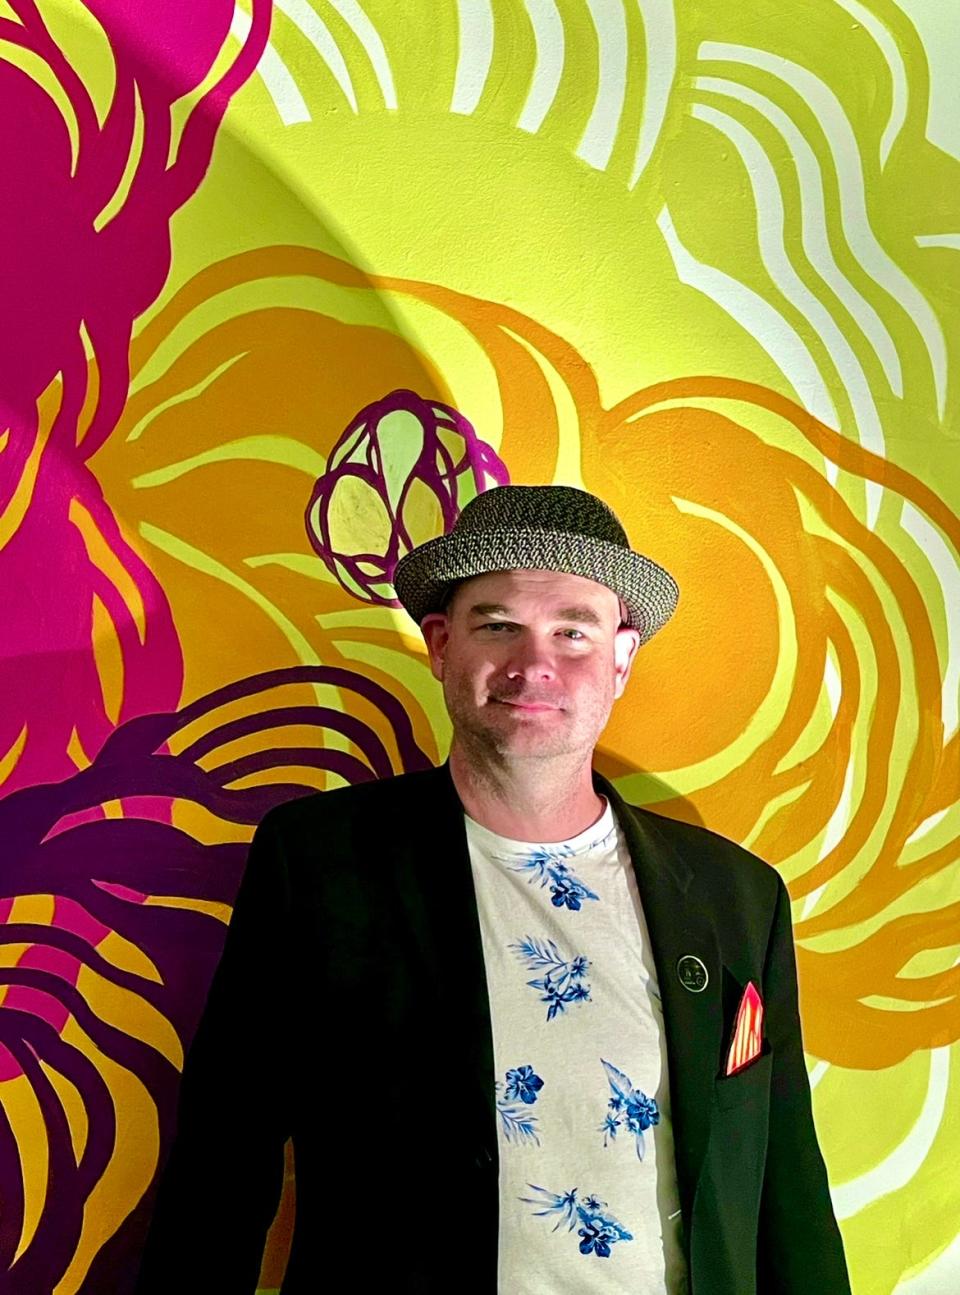 Daniel "Attaboy" Seifert, artist, co-founder of Hi-Frustose Magazine and founder of the Game of Shrooms.